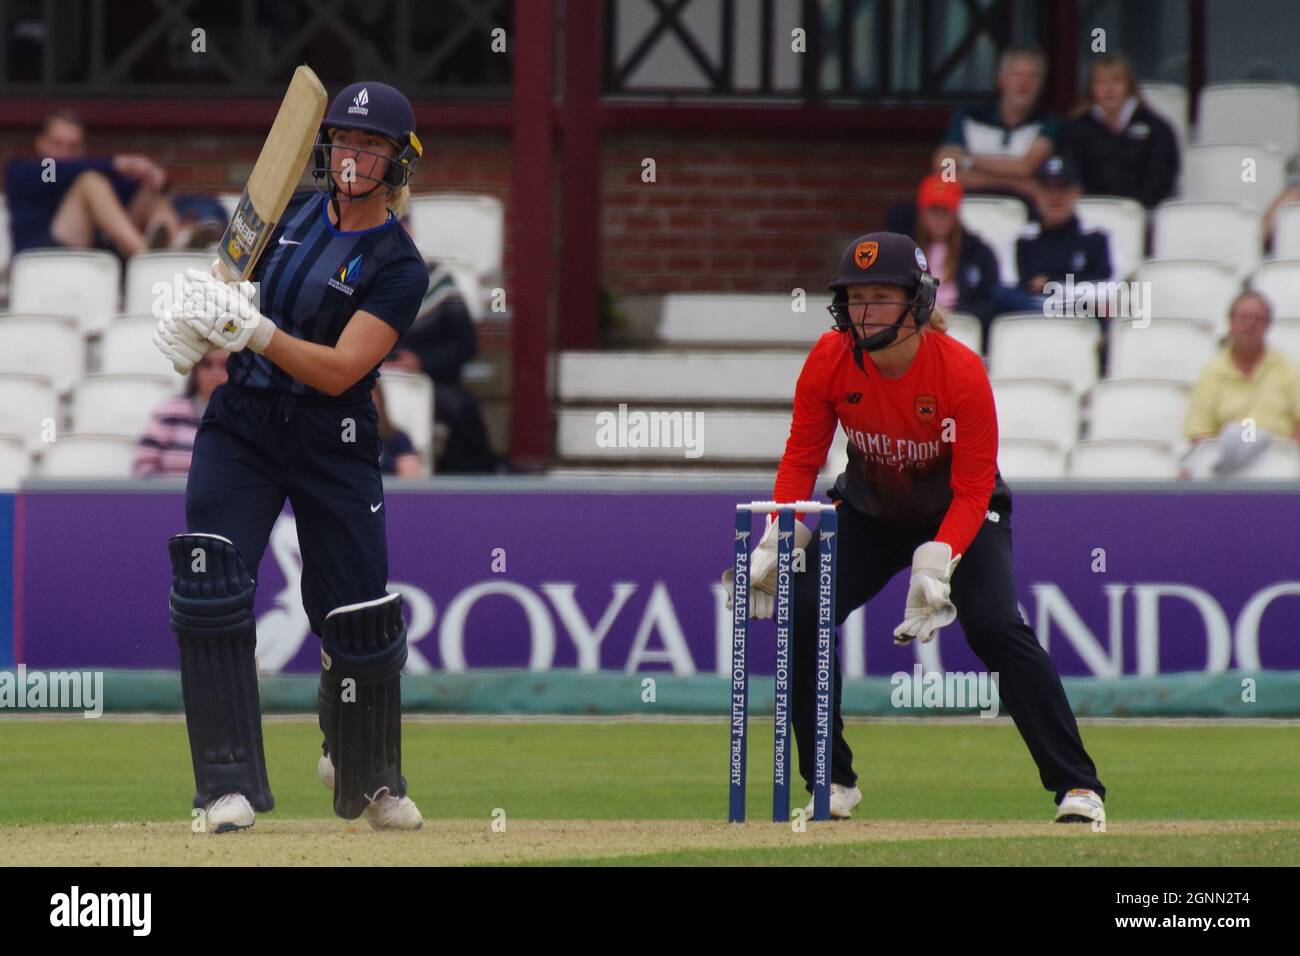 Northampton, England, 25 September 2021. Ami Campbell batting for Northern Diamonds against Southern Vipers in the Rachael Heyhoe Flint Trophy Final at the County Ground Northampton. Carla Rudd is keeping wicket. Credit: Colin Edwards Stock Photo